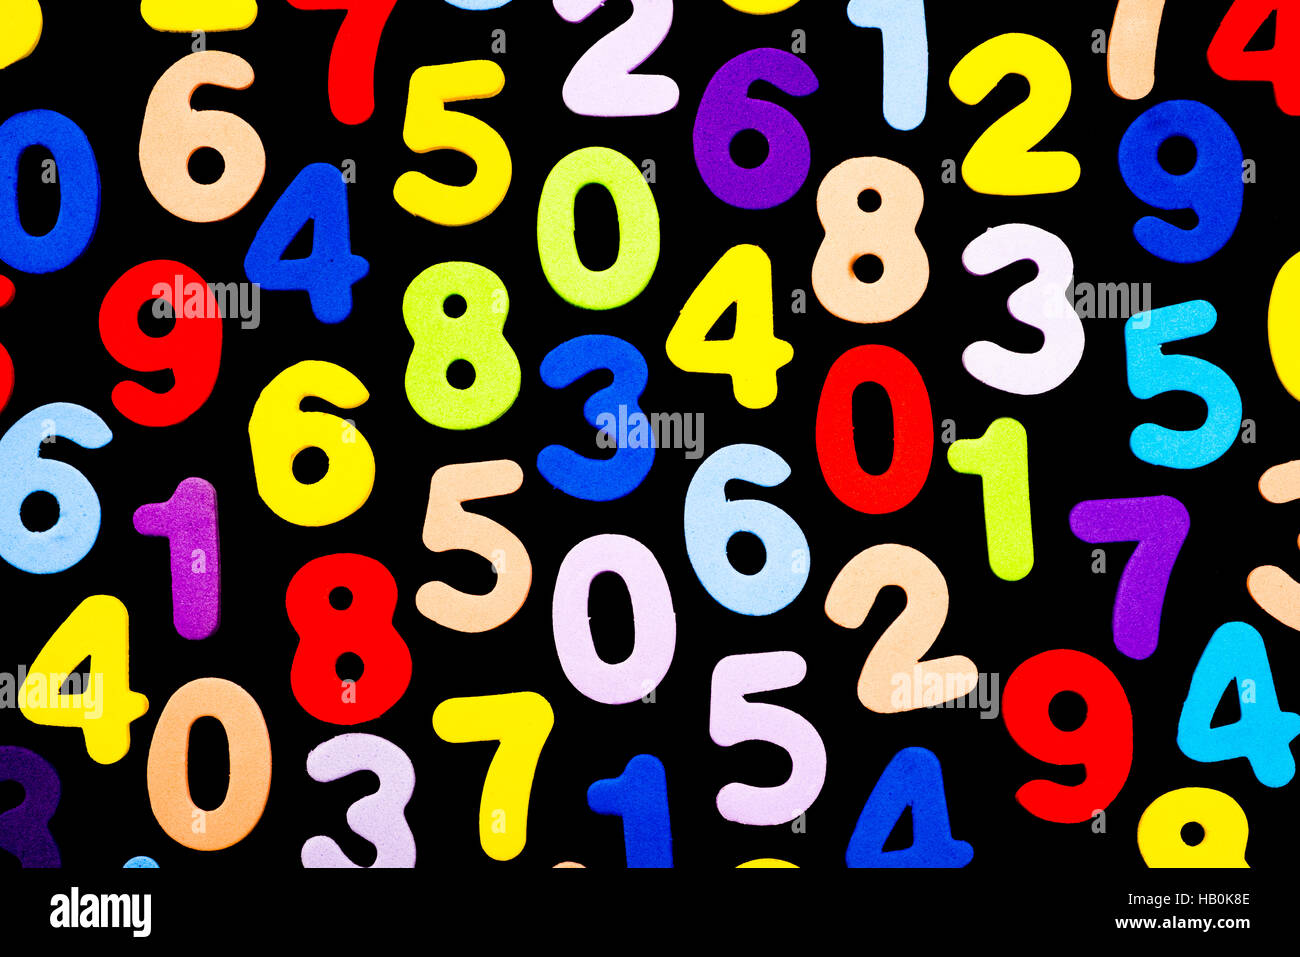 Brightly coloured numbers on black background Stock Photo